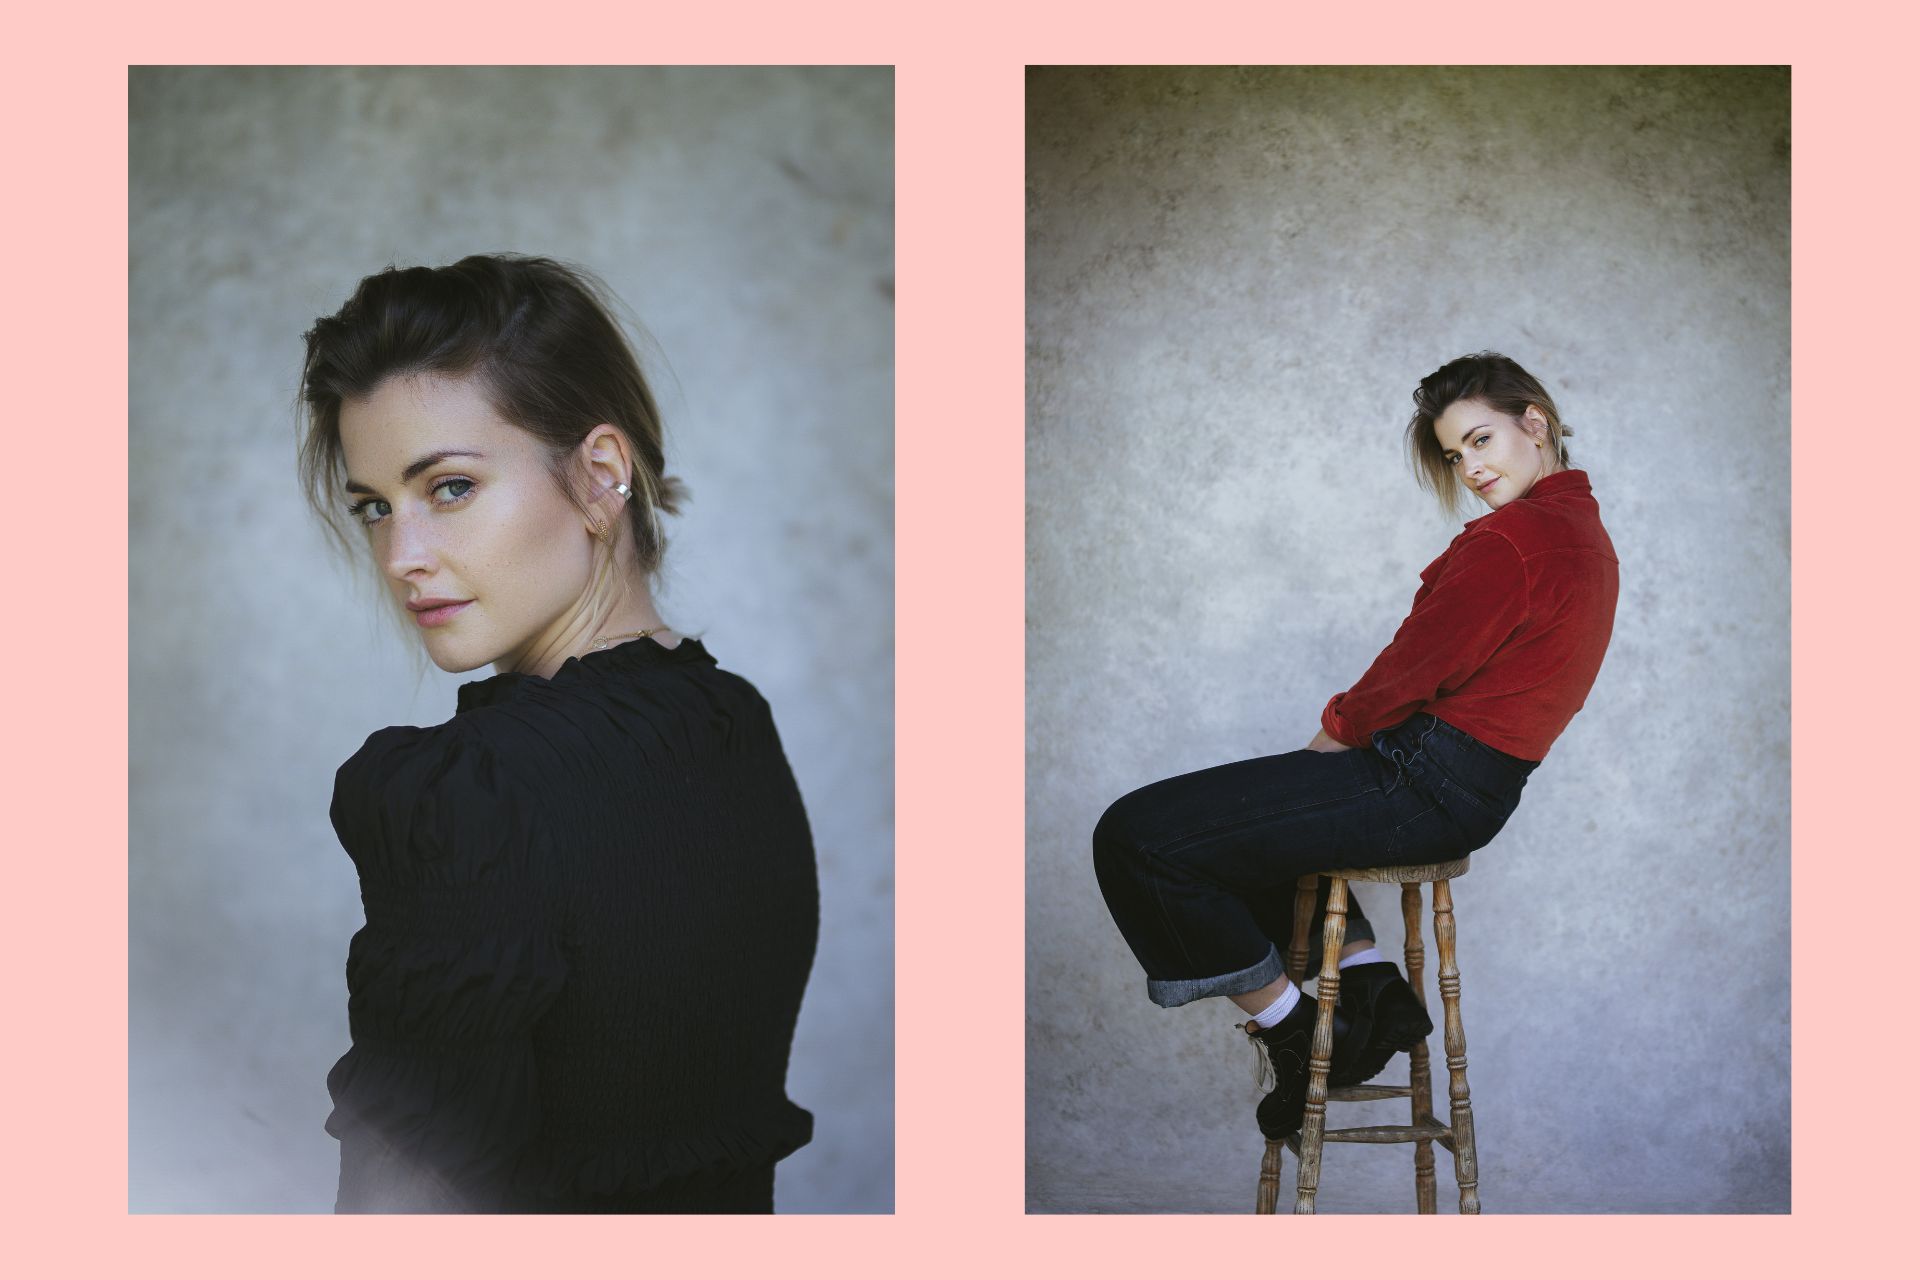 Two images of Stefanie Martini against a pink background